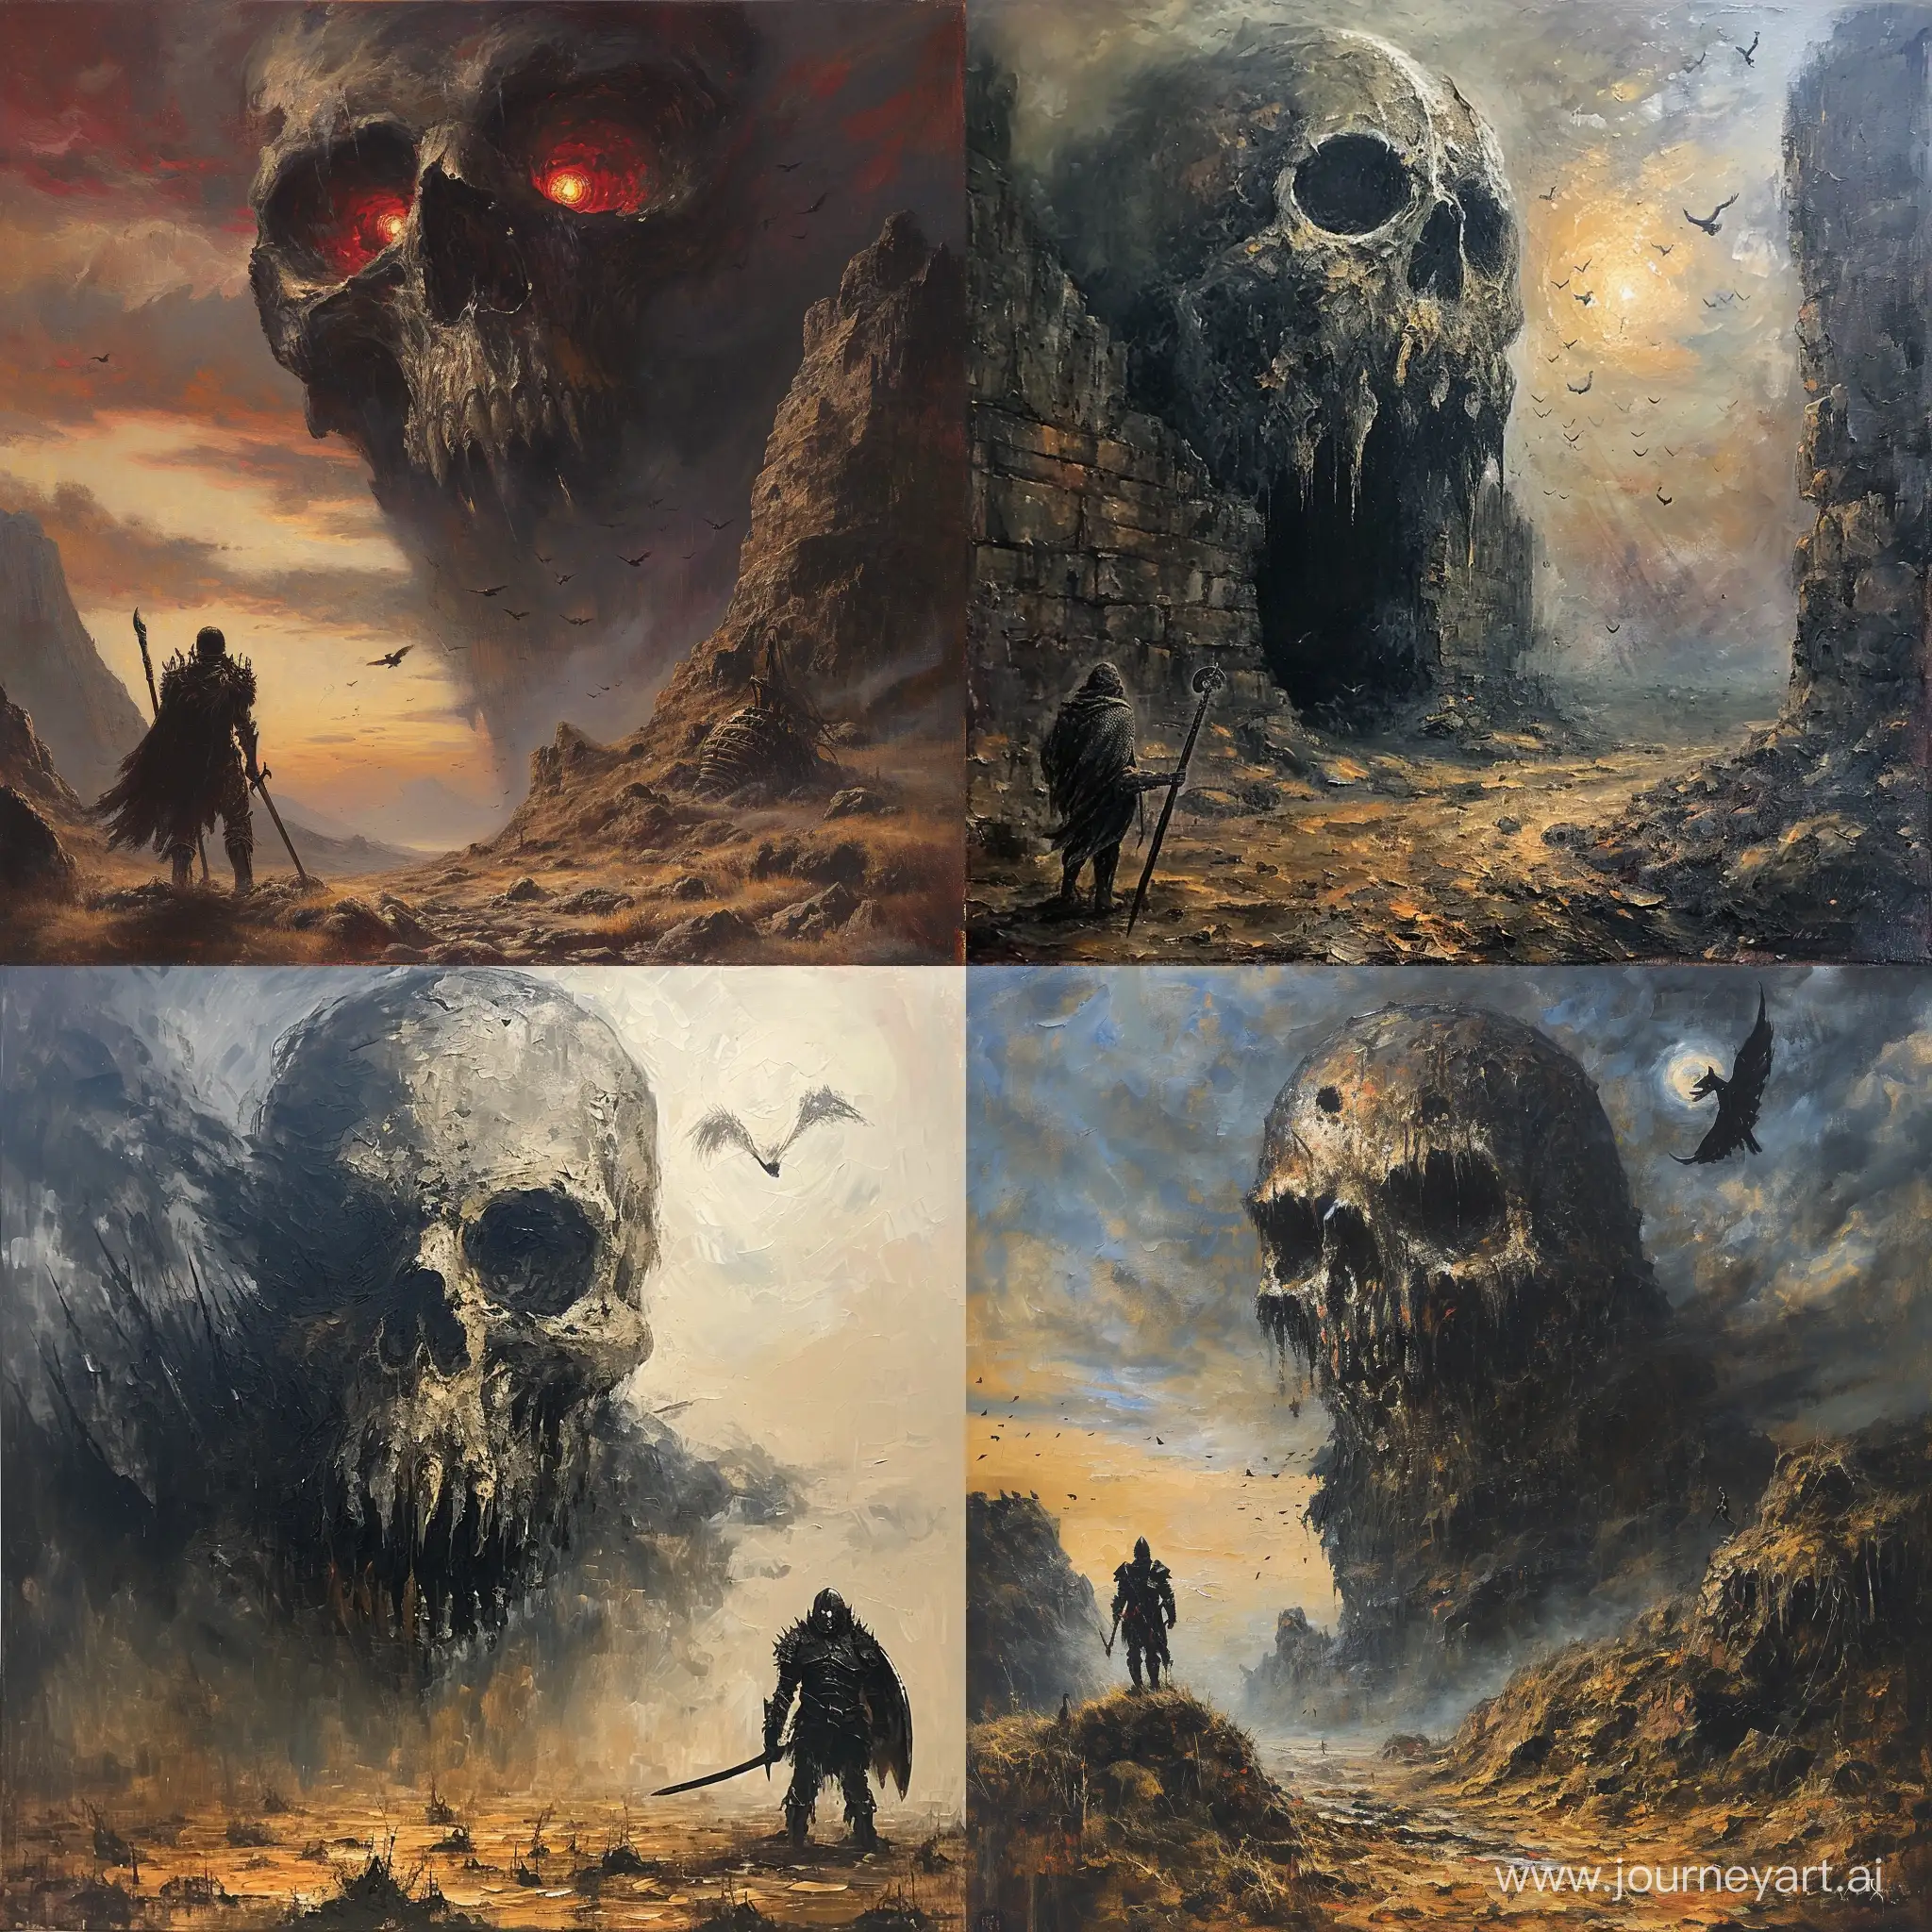 Oil painting, ::1.2. a warrior stands in a desolate land with a giant skull looming above them. The warrior is equipped with a sword and shield, there is a skull with glowing eyes in the background. The scene is set at dusk, there are crows flying around. Oil painting, --v 6